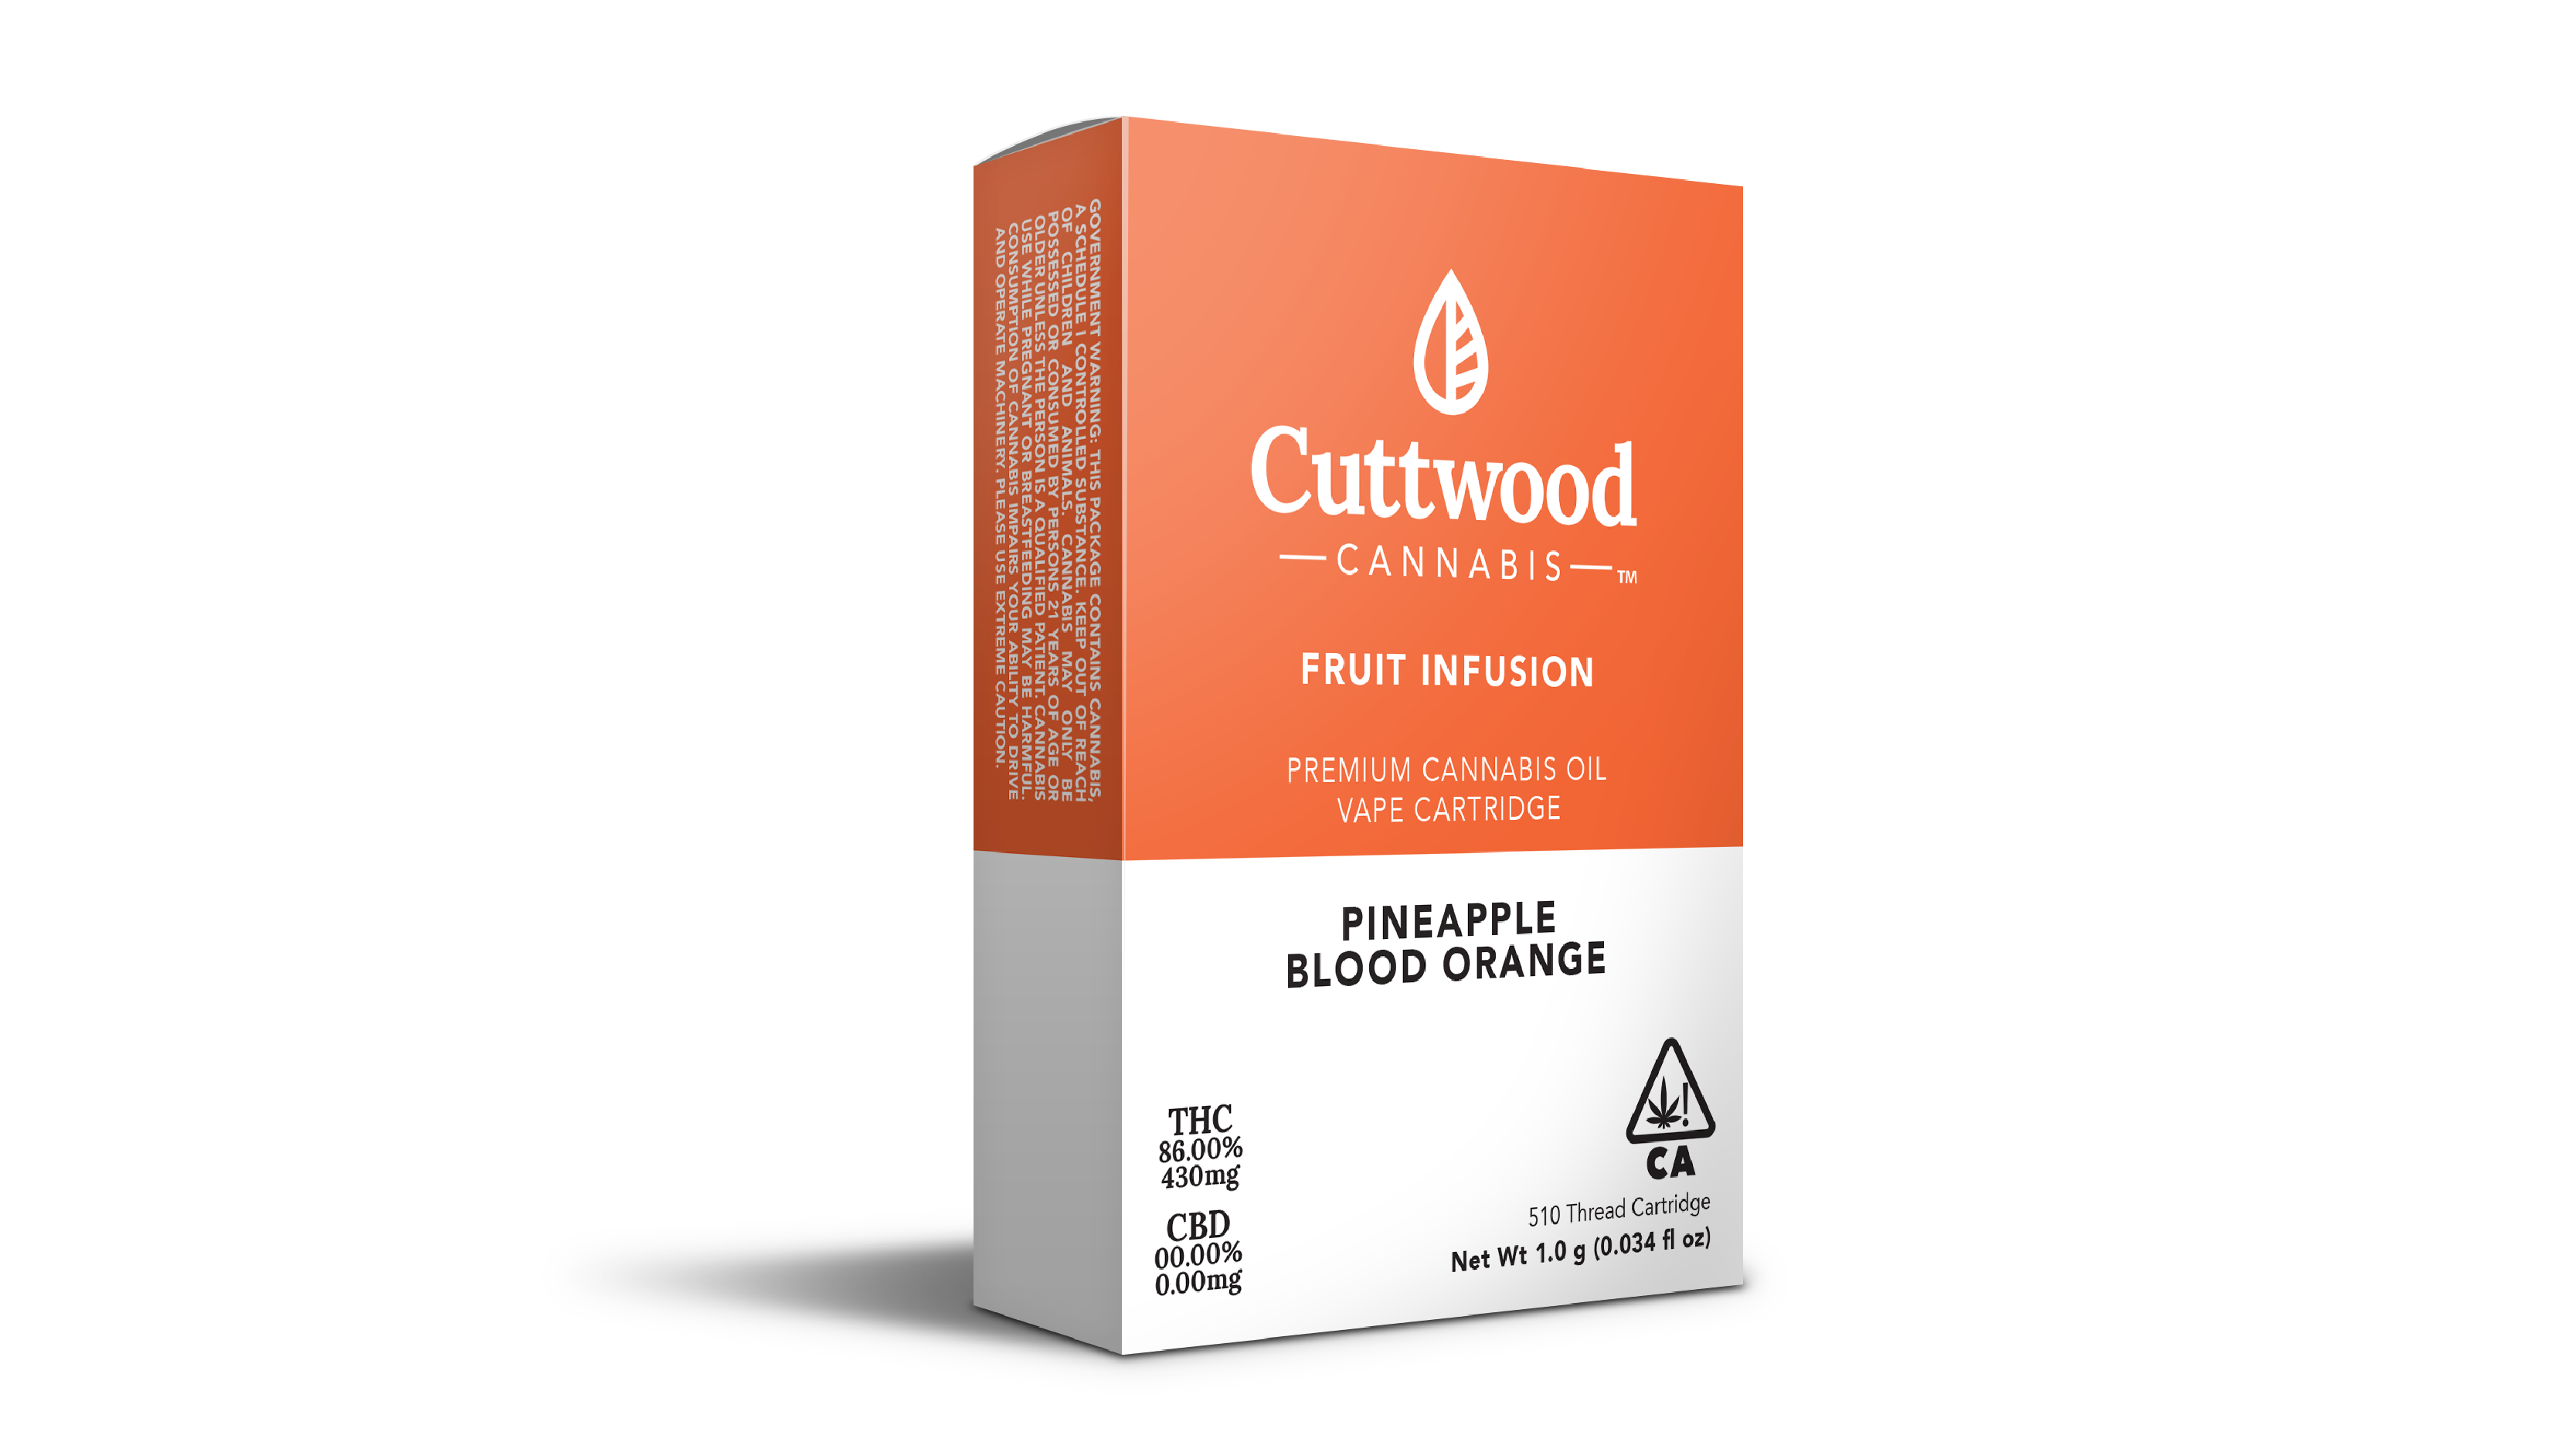 Core Cuttwood Mockup Images-06